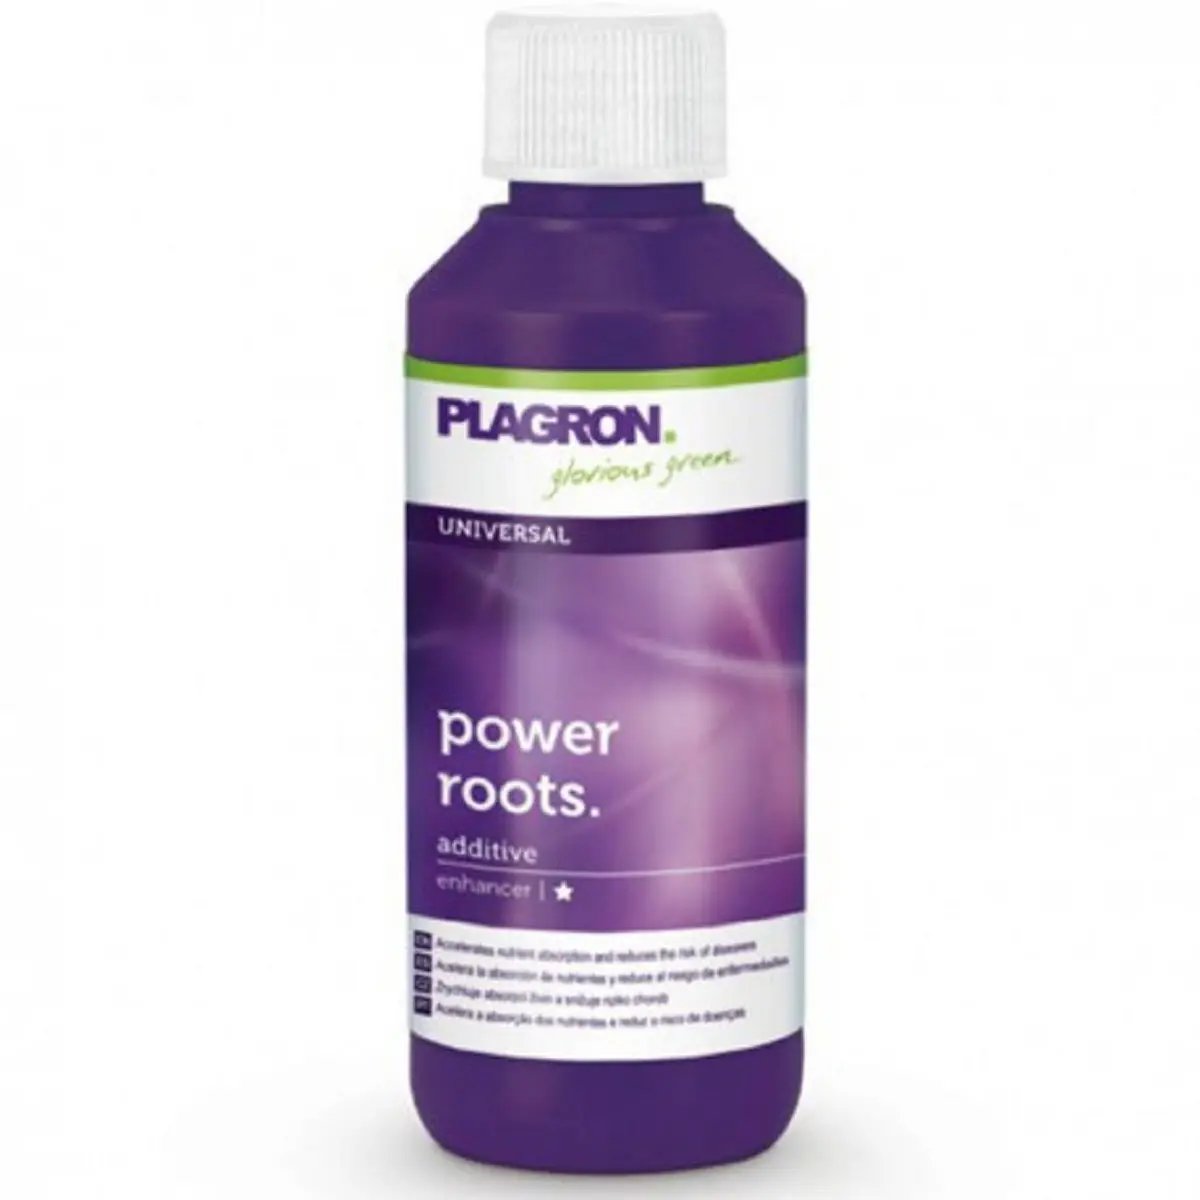 Plagron Power roots 100ml